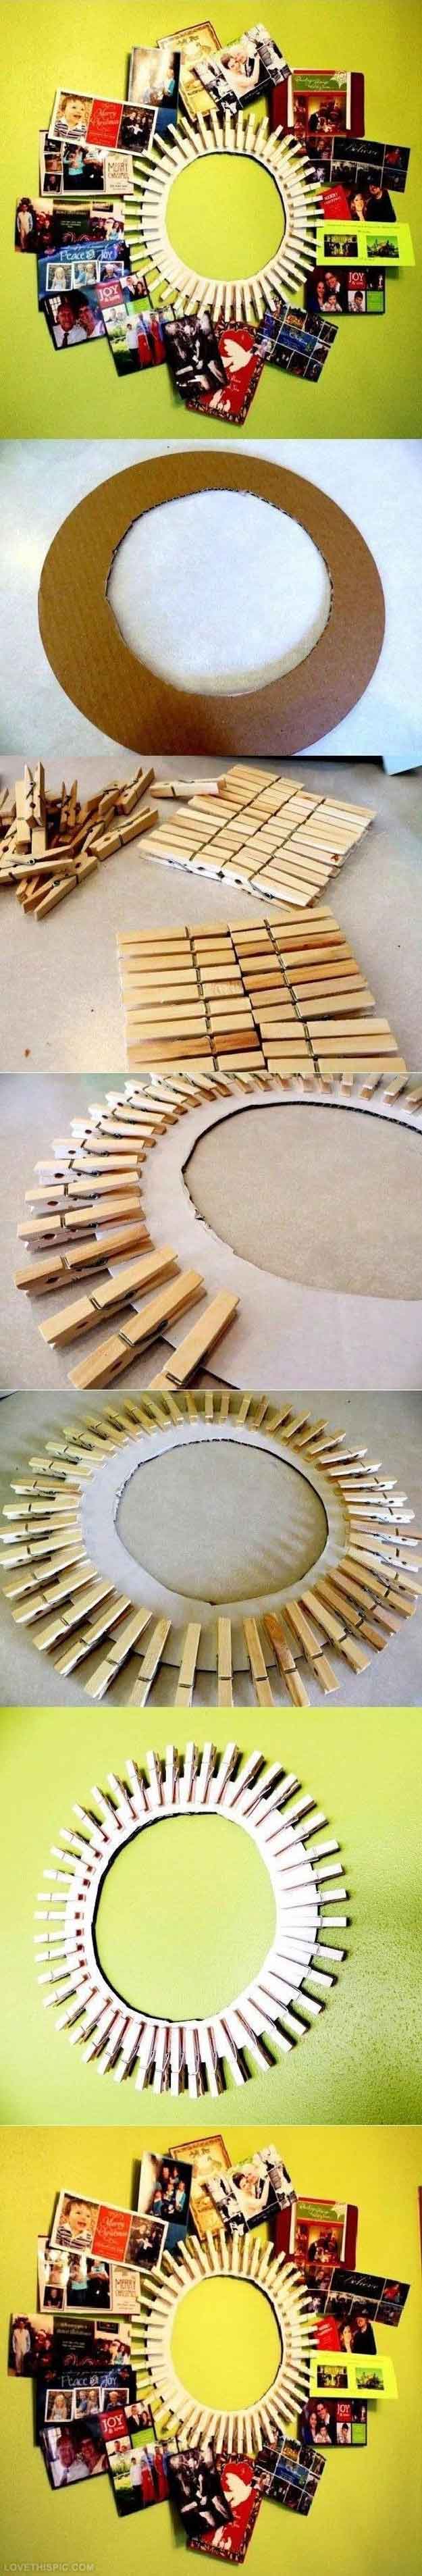 Cute DIY Room Decor Ideas for Teens - DIY Bedroom Projects for Teenagers - Clothespin Mirror Craft